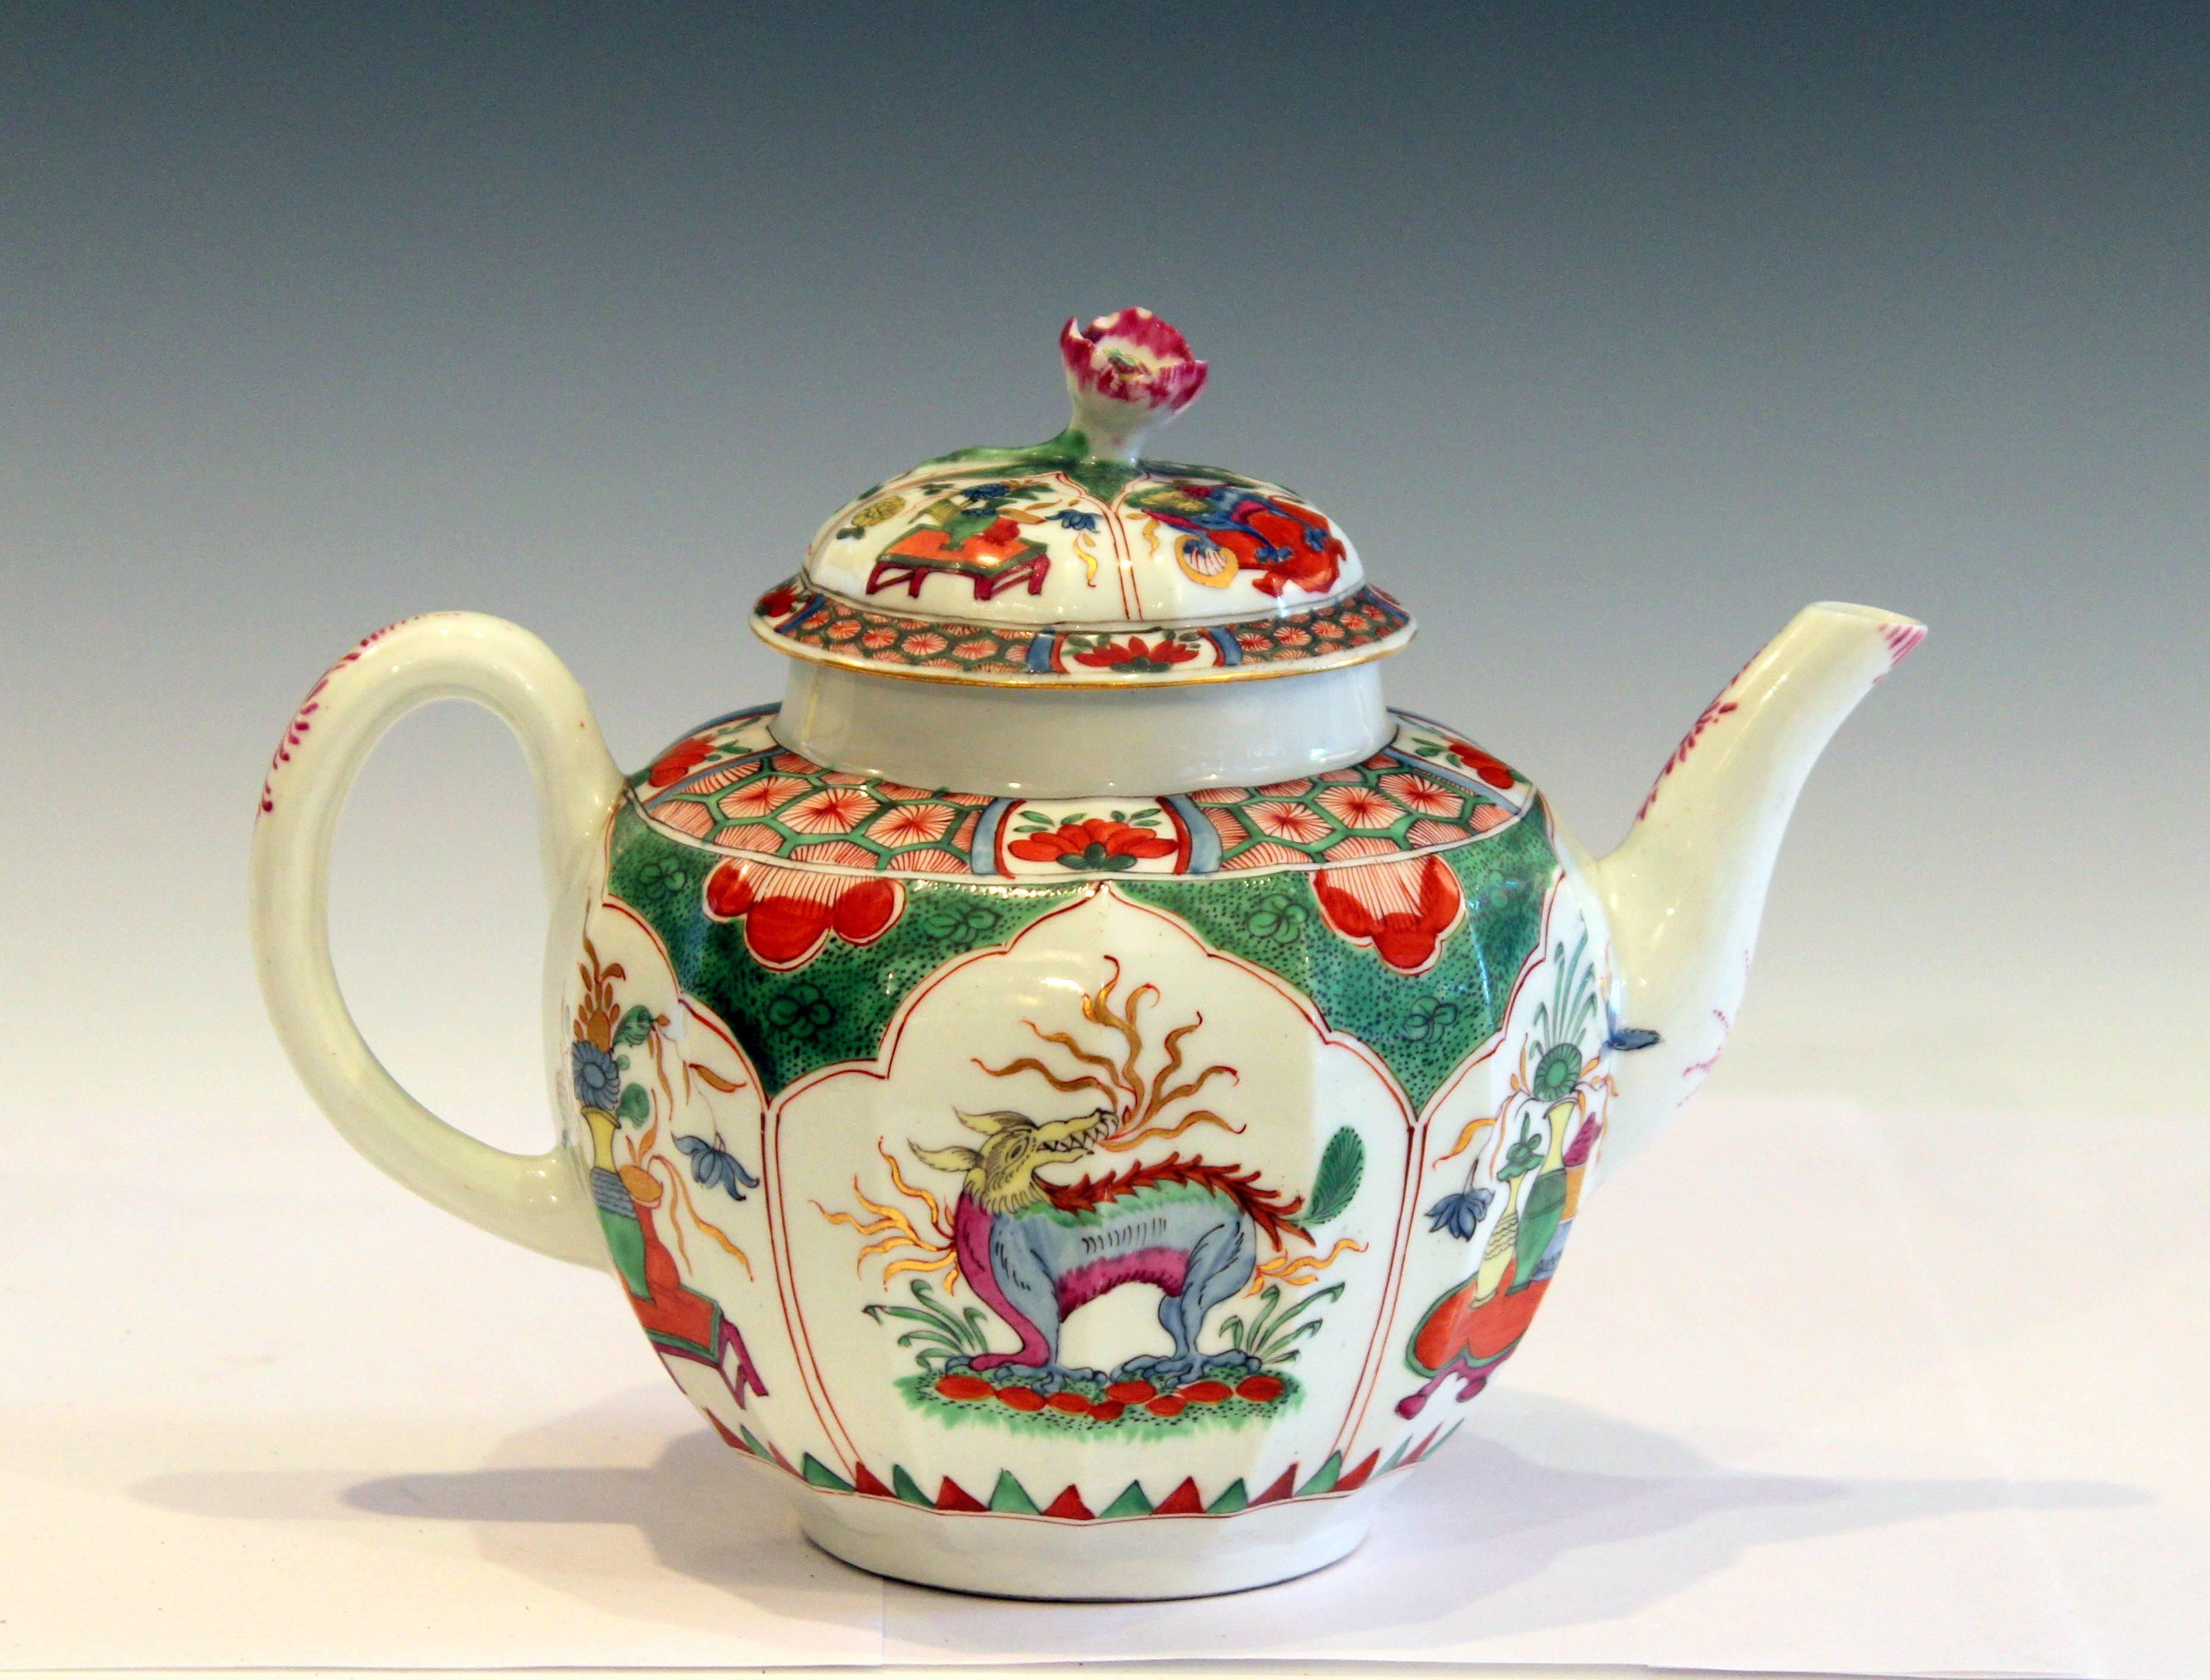 Early Worcester porcelain lobed teapot in the 